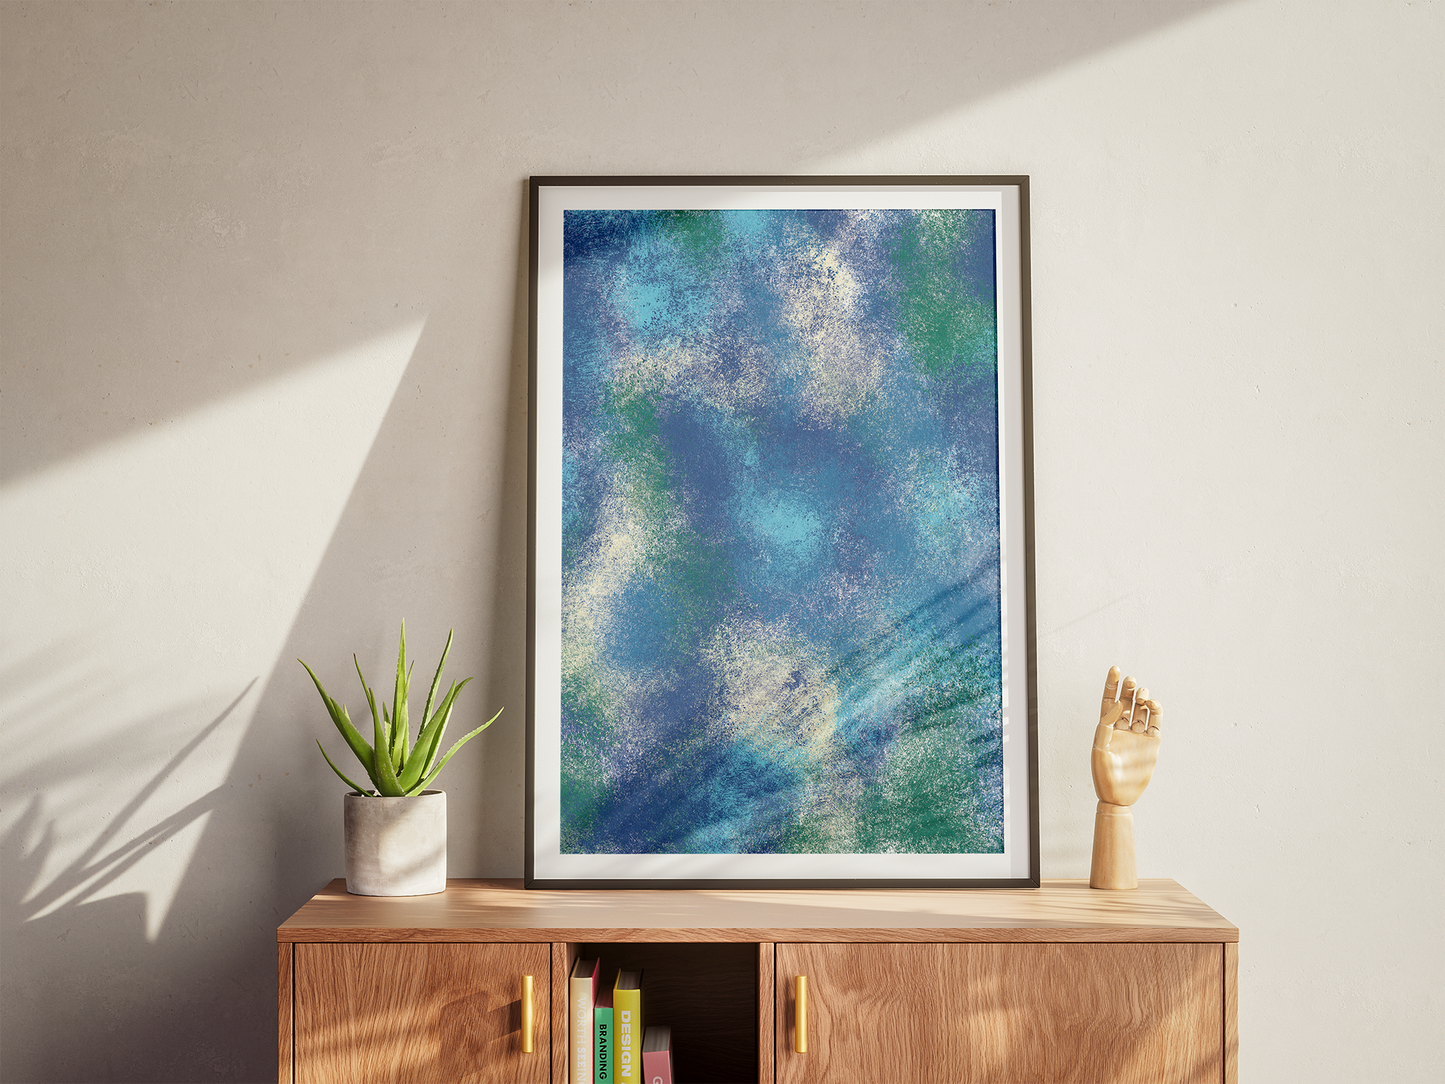 Digitally crafted abstract free painting with a vibrant blend of blue and green, giving the impression of a misty seascape, elegantly framed and featured in a light-filled eco-conscious living room.